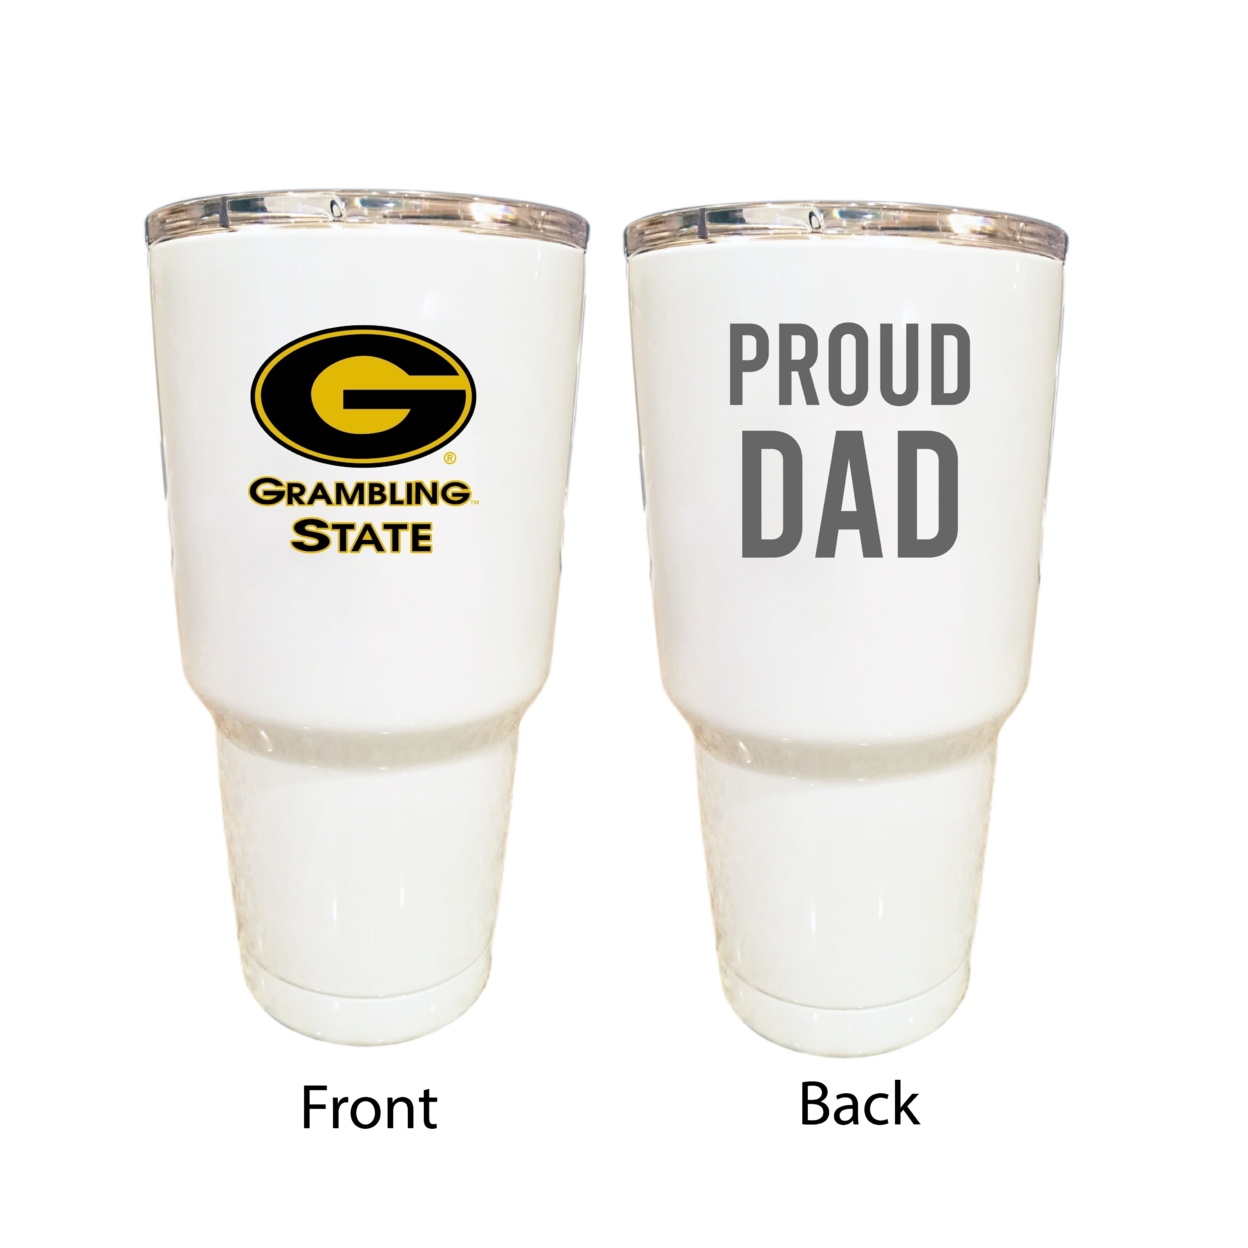 Grambling University Tigers Proud Dad 24 Oz Insulated Stainless Steel Tumblers Choose Your Color.